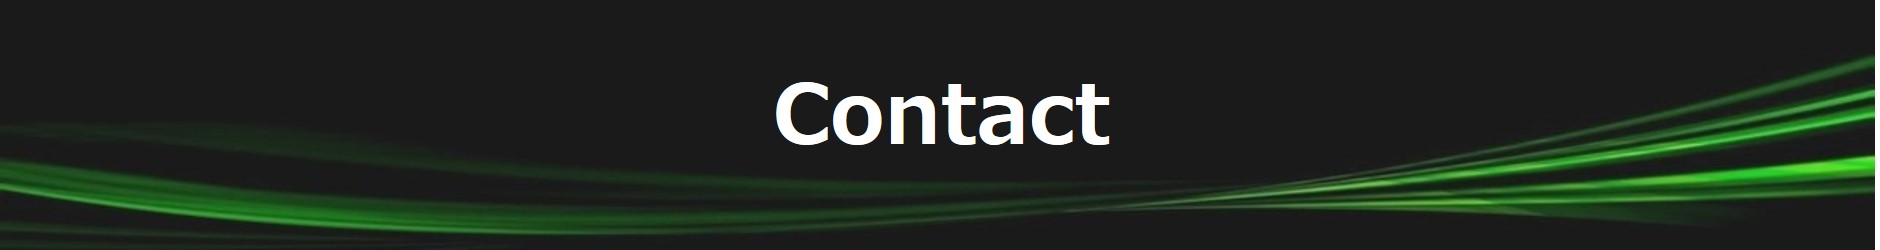 title-contact